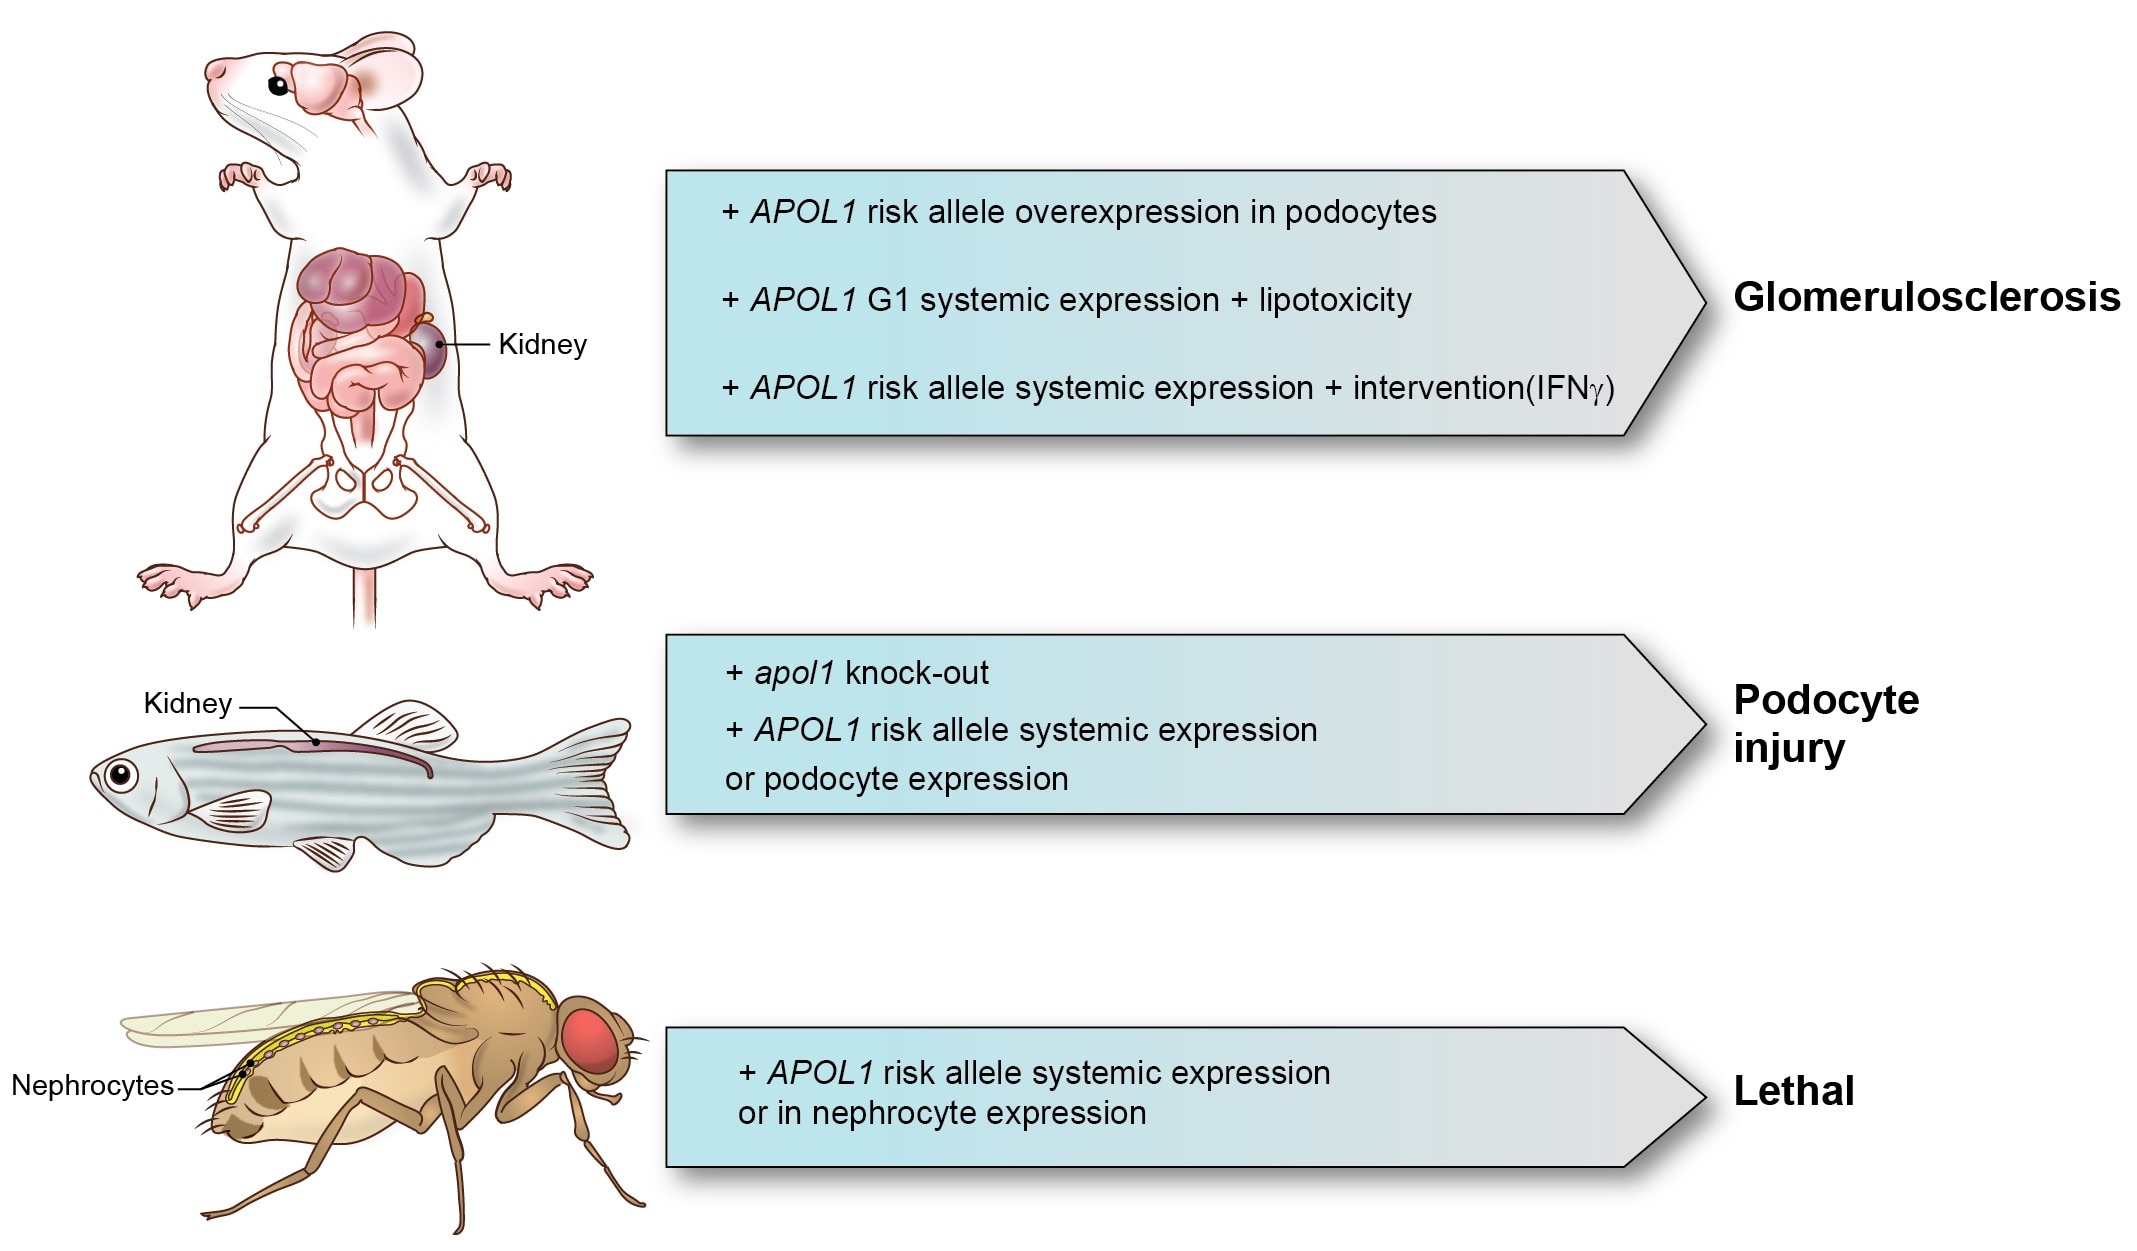 Animal models currently employed to investigate APOL1 risk allele toxicities 